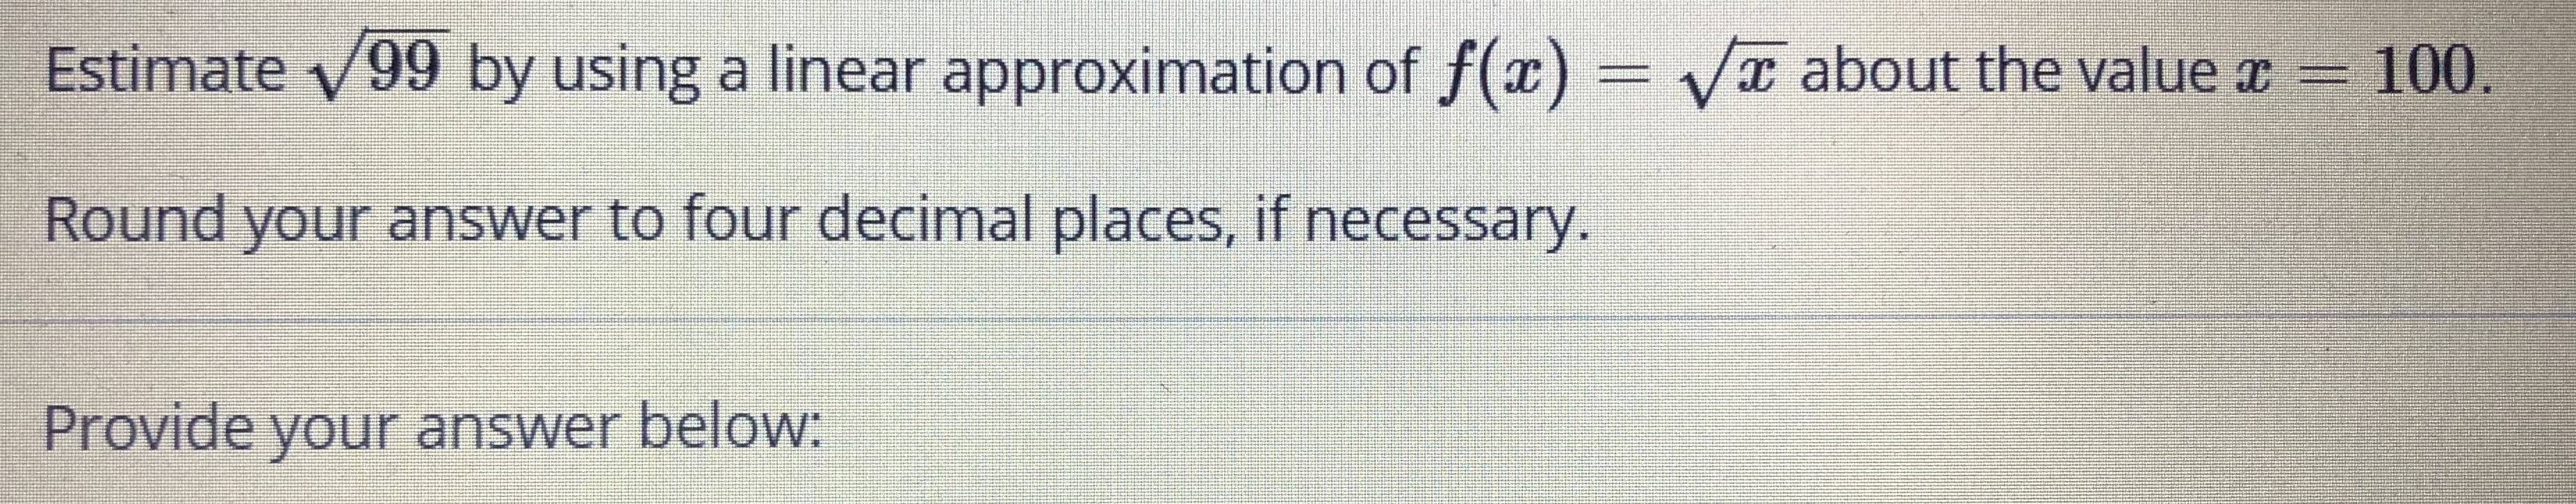 Estimate v99 by using a linear approximation of f(x) = /x about the value c = 100.
Round your answer to four decimal places, if necessary.
